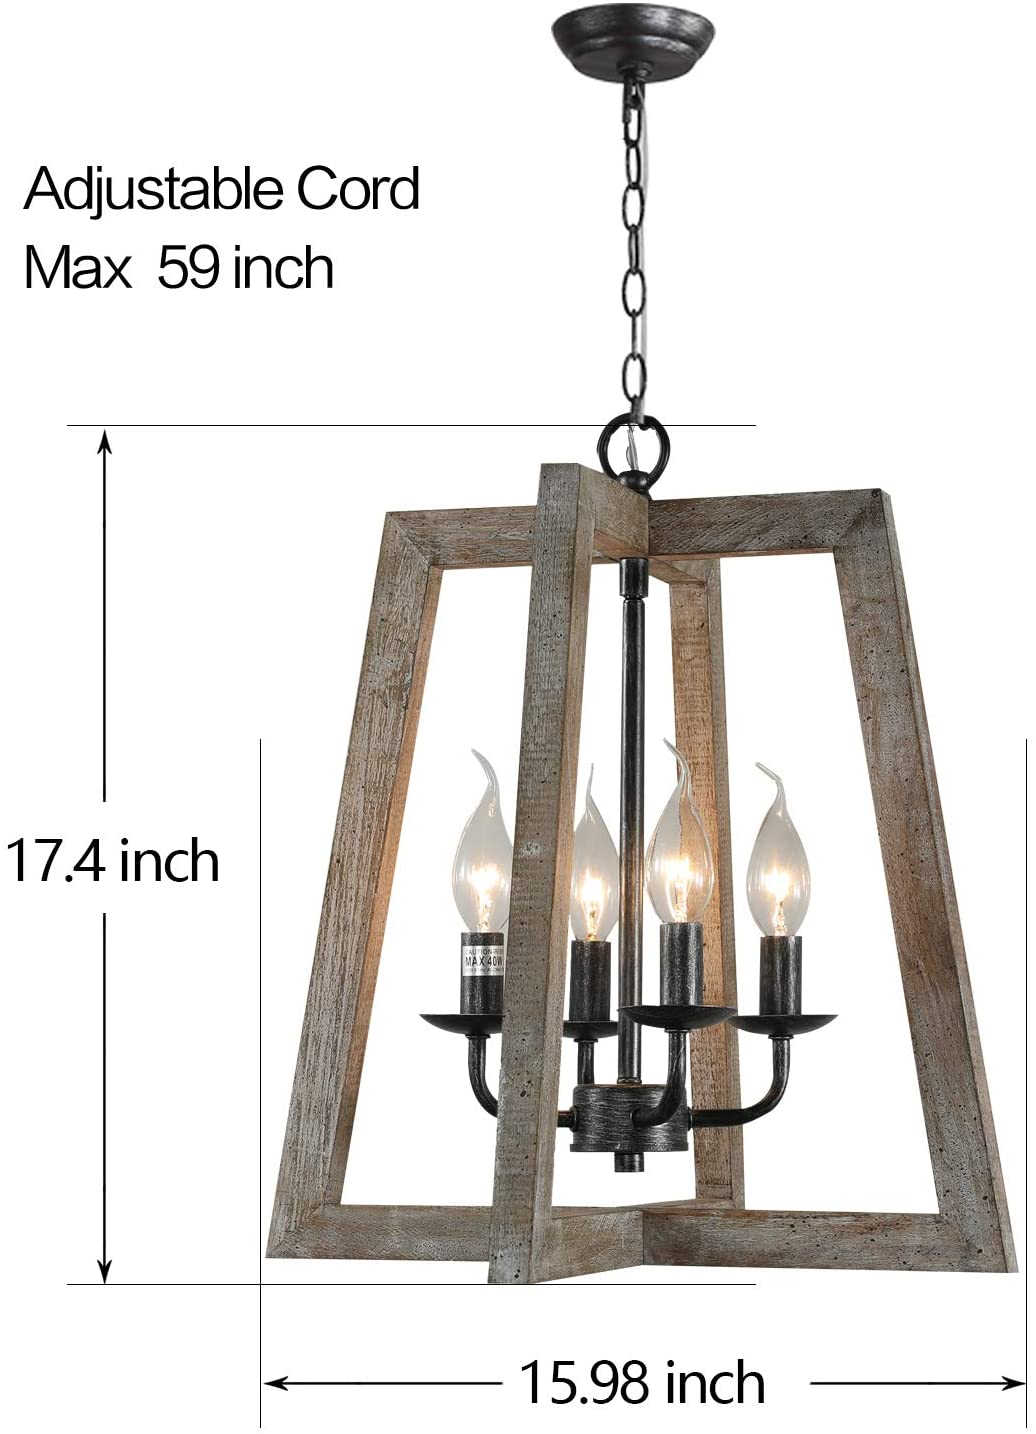 4 light candle chandelier rustic pendant lighting with antique wood frame finish